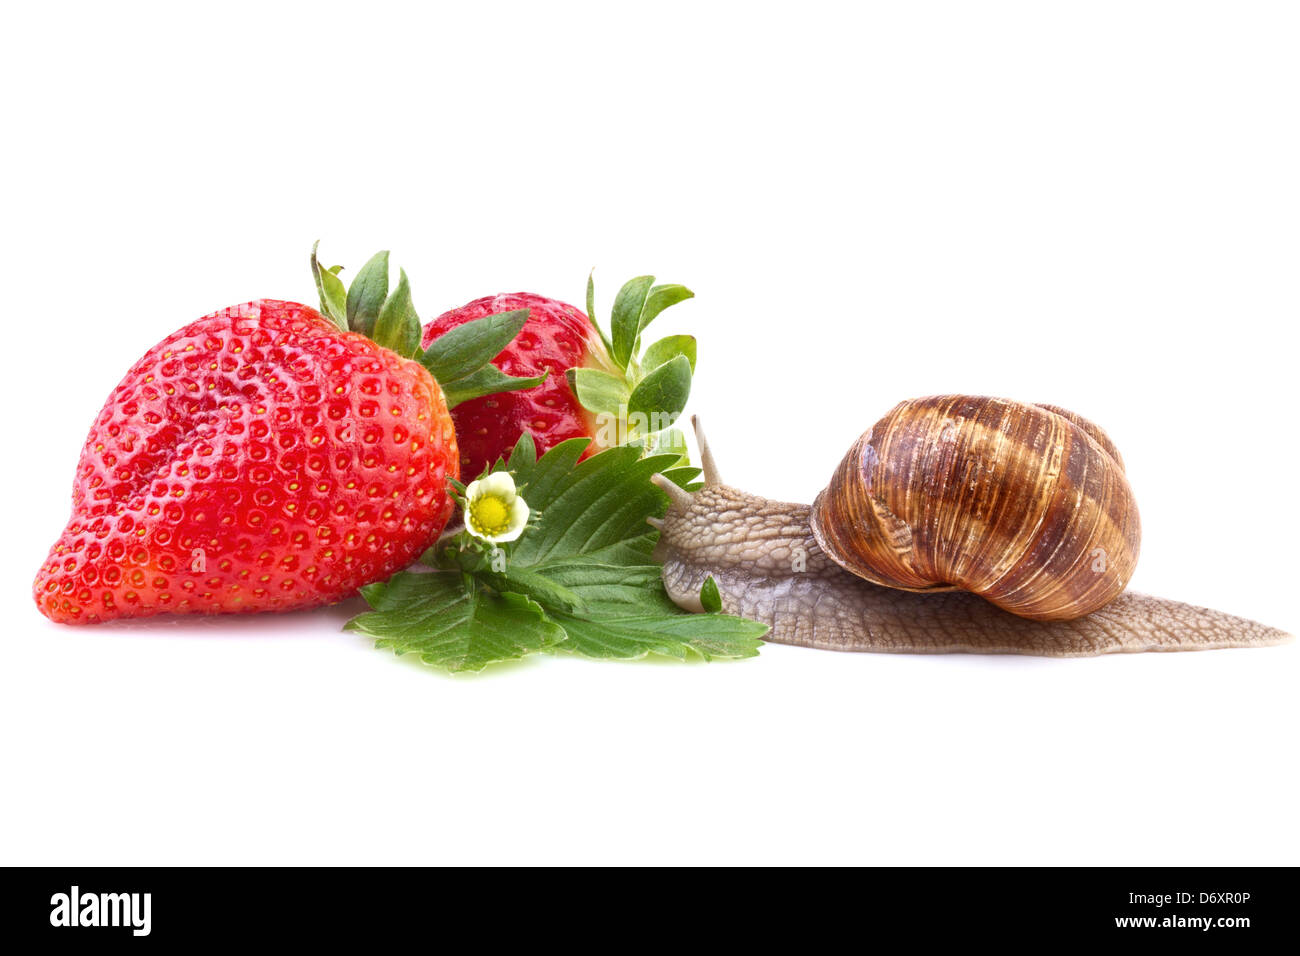 Snail creeping sulle fragole mature Foto Stock